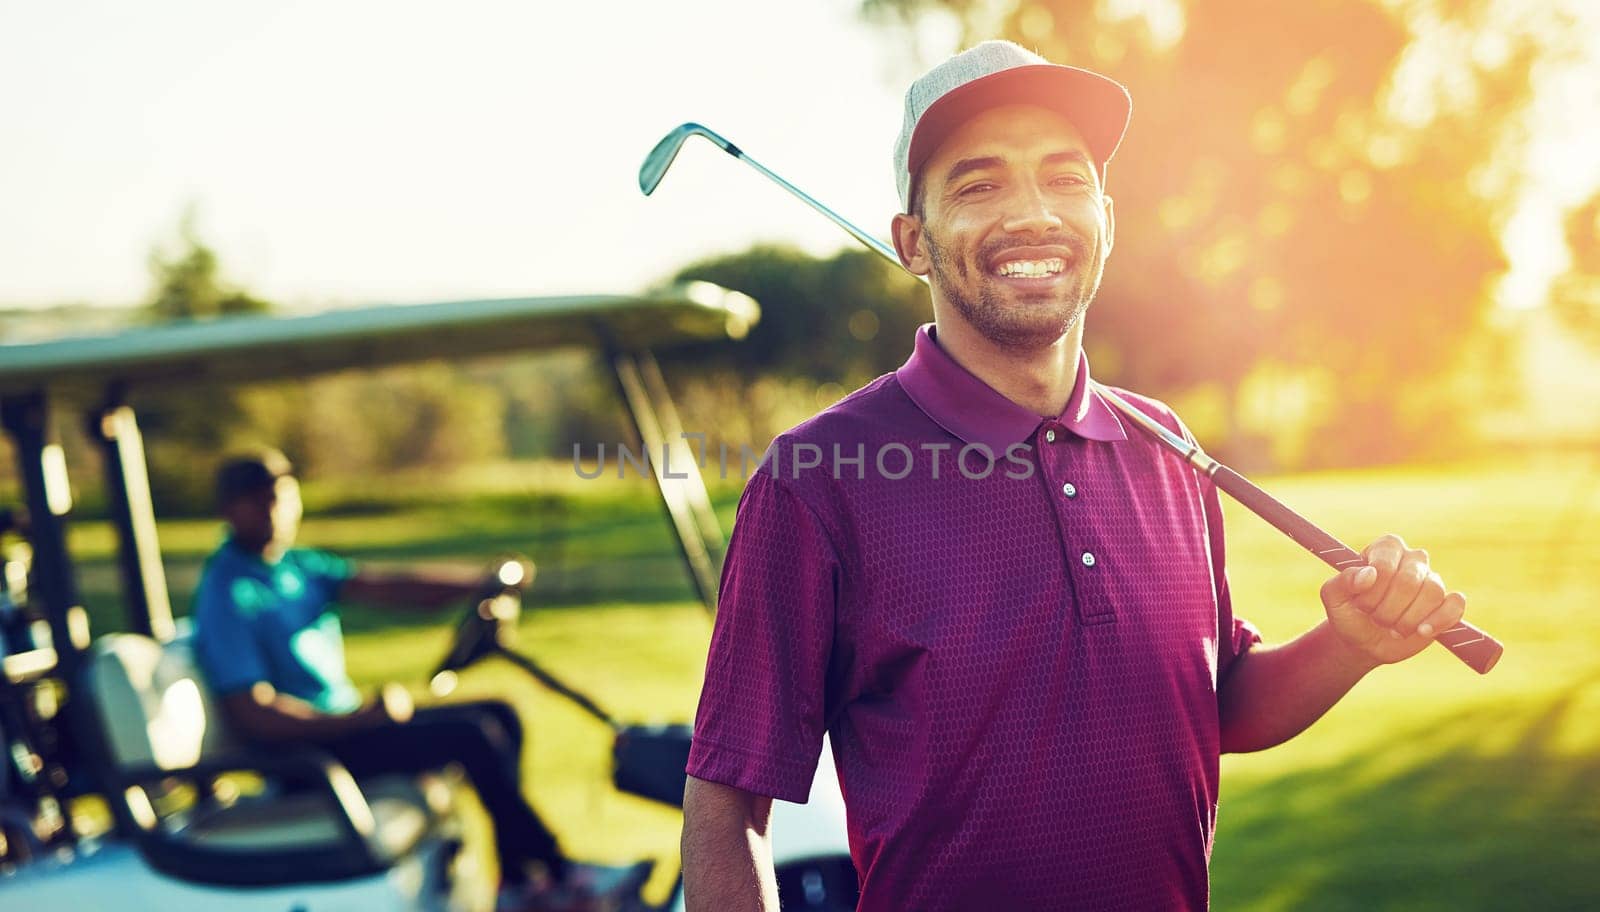 Sometimes golfing is the only therapy you need. Portrait of a golfer holding his club with a buggy blurred in the background. by YuriArcurs